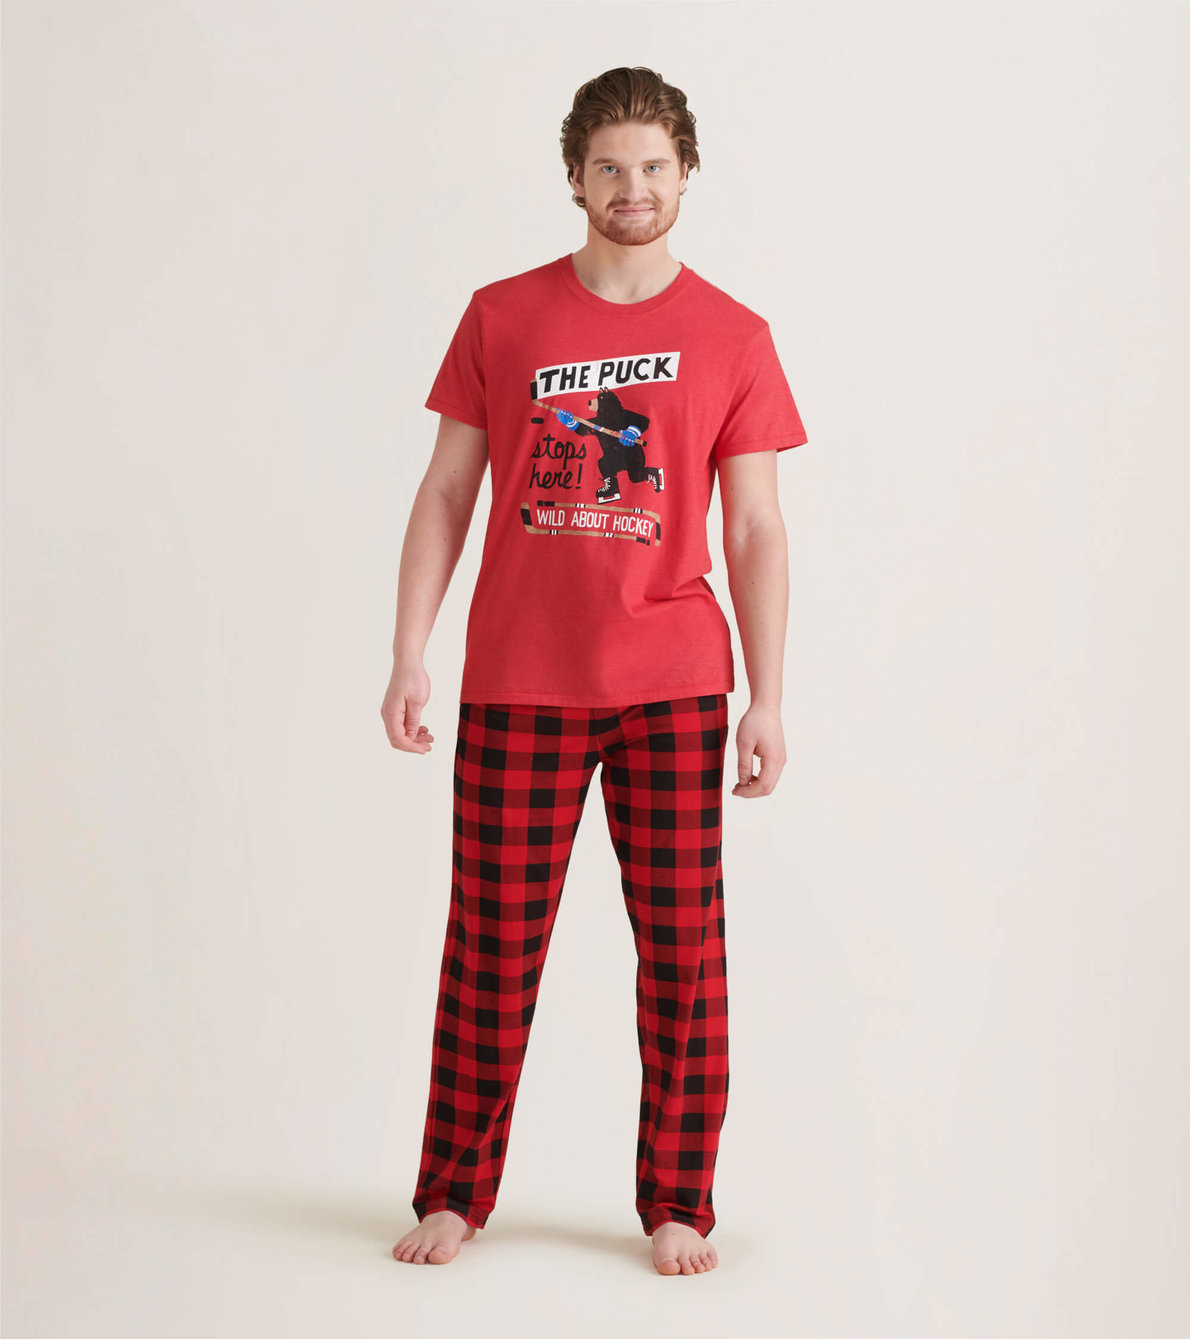 View larger image of Wild About Hockey Men's Tee and Pants Pajama Separates